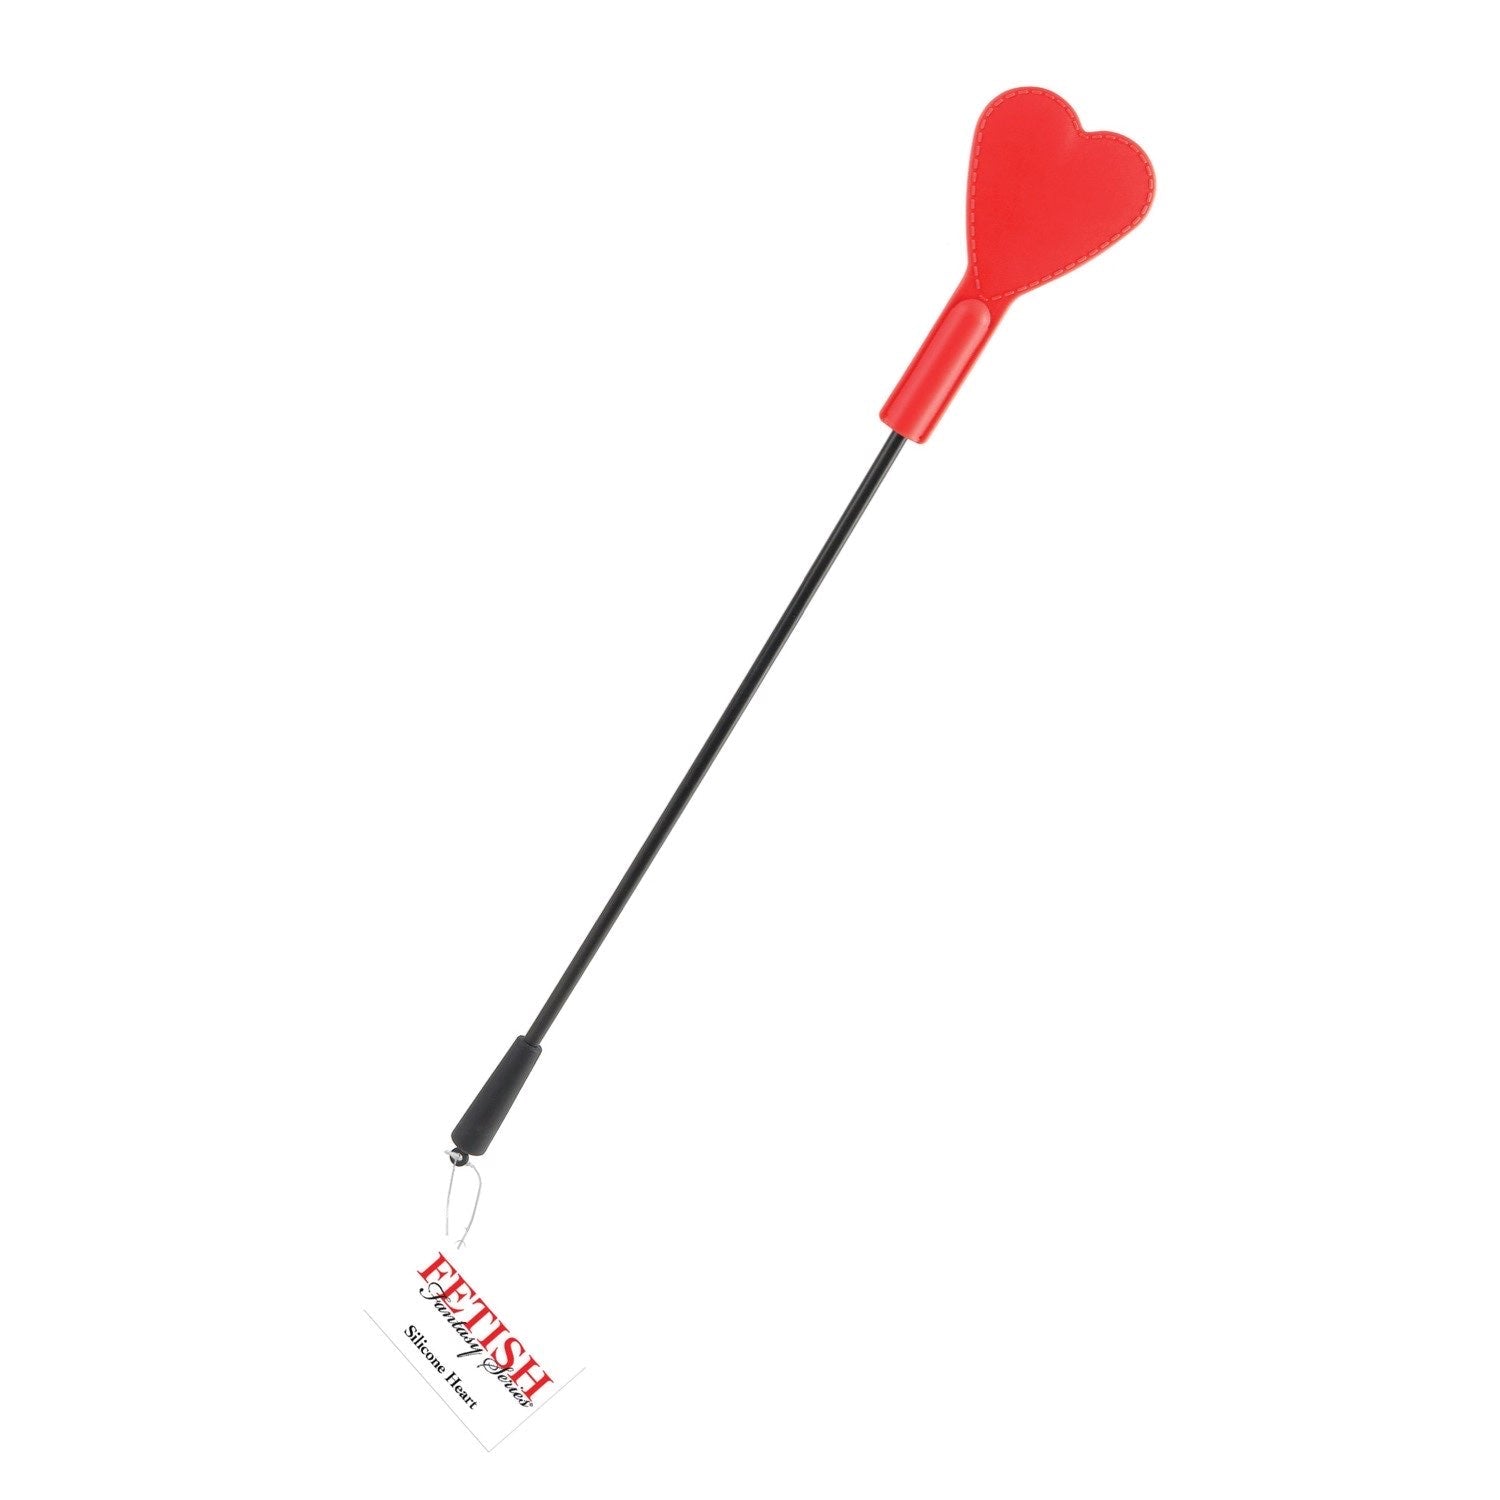 Fetish Fantasy Series Silicone Heart - Red Whip by Pipedream